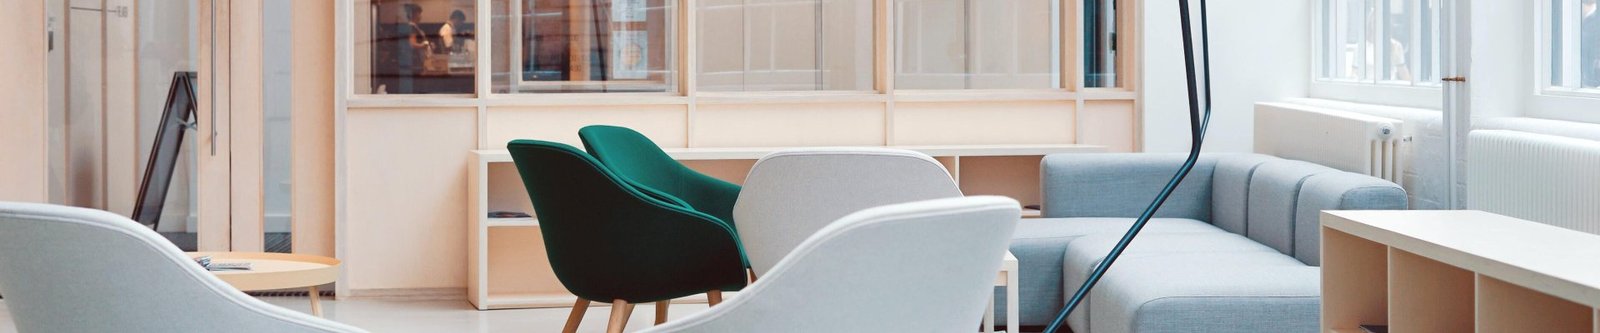 Coworking space with green and gray chairs